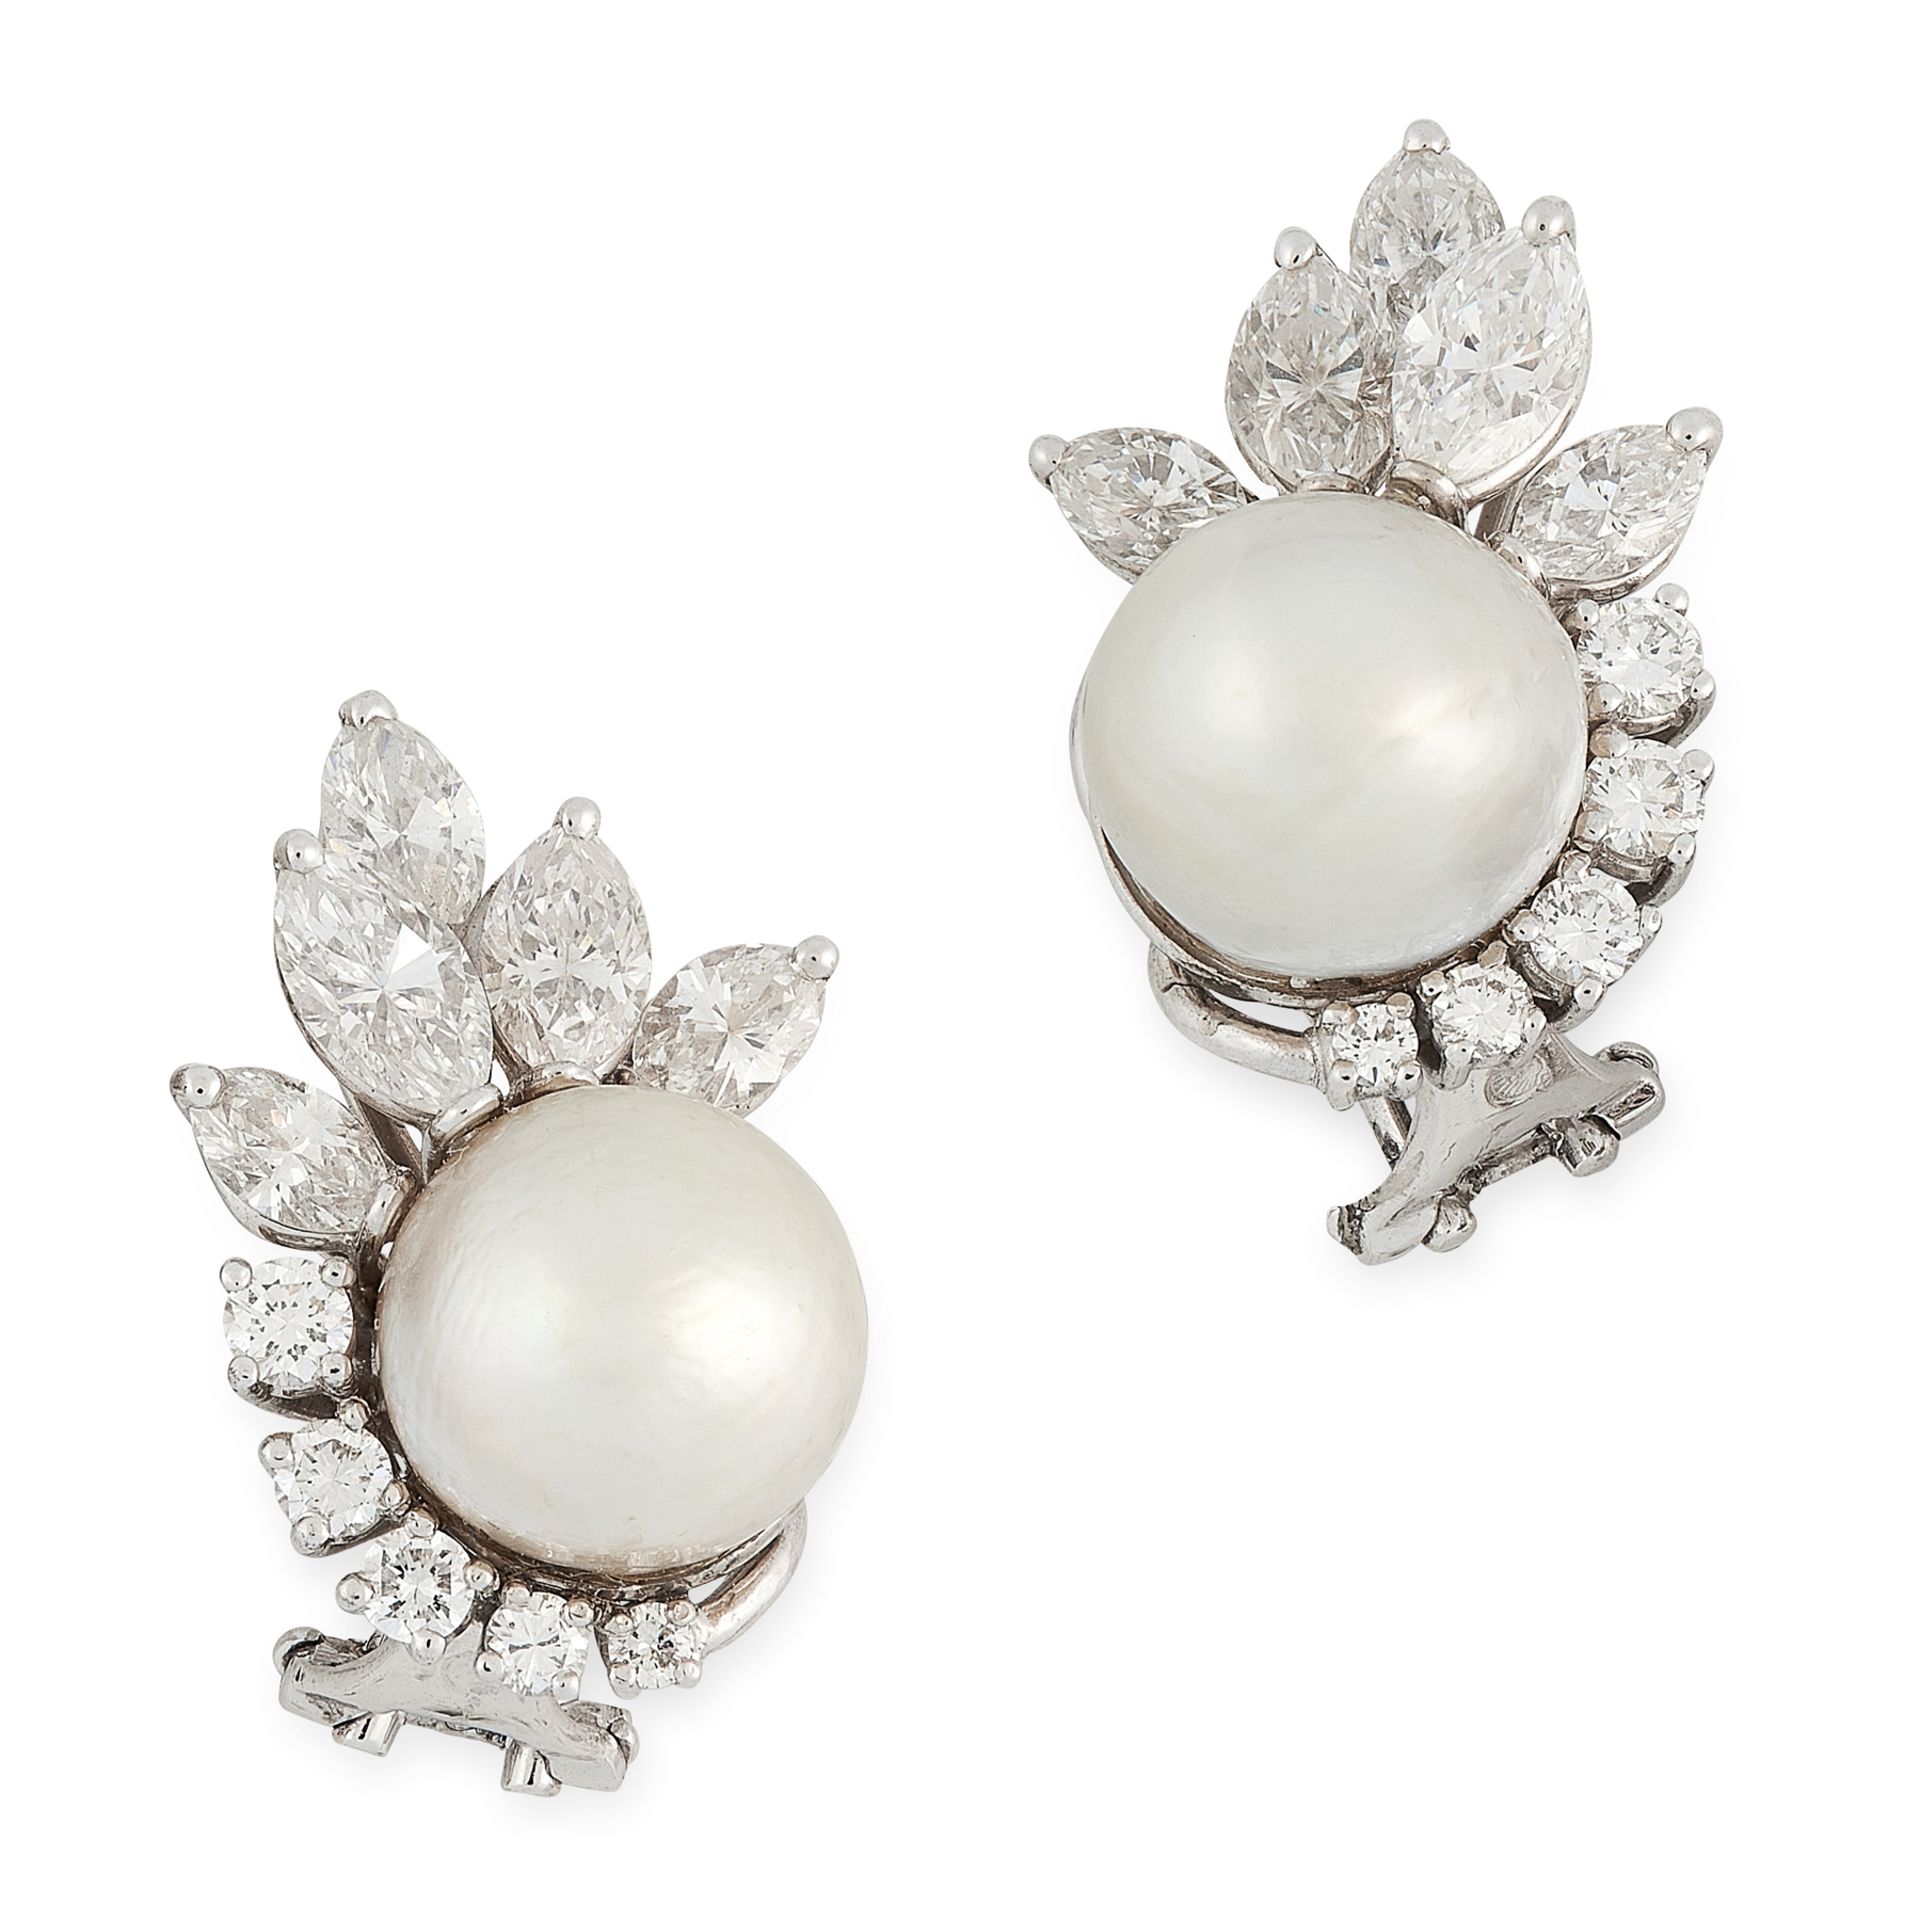 A PAIR OF NATURAL PEARL AND DIAMOND EARRINGS in 14ct white gold, each set with a pearl of 9.96 and